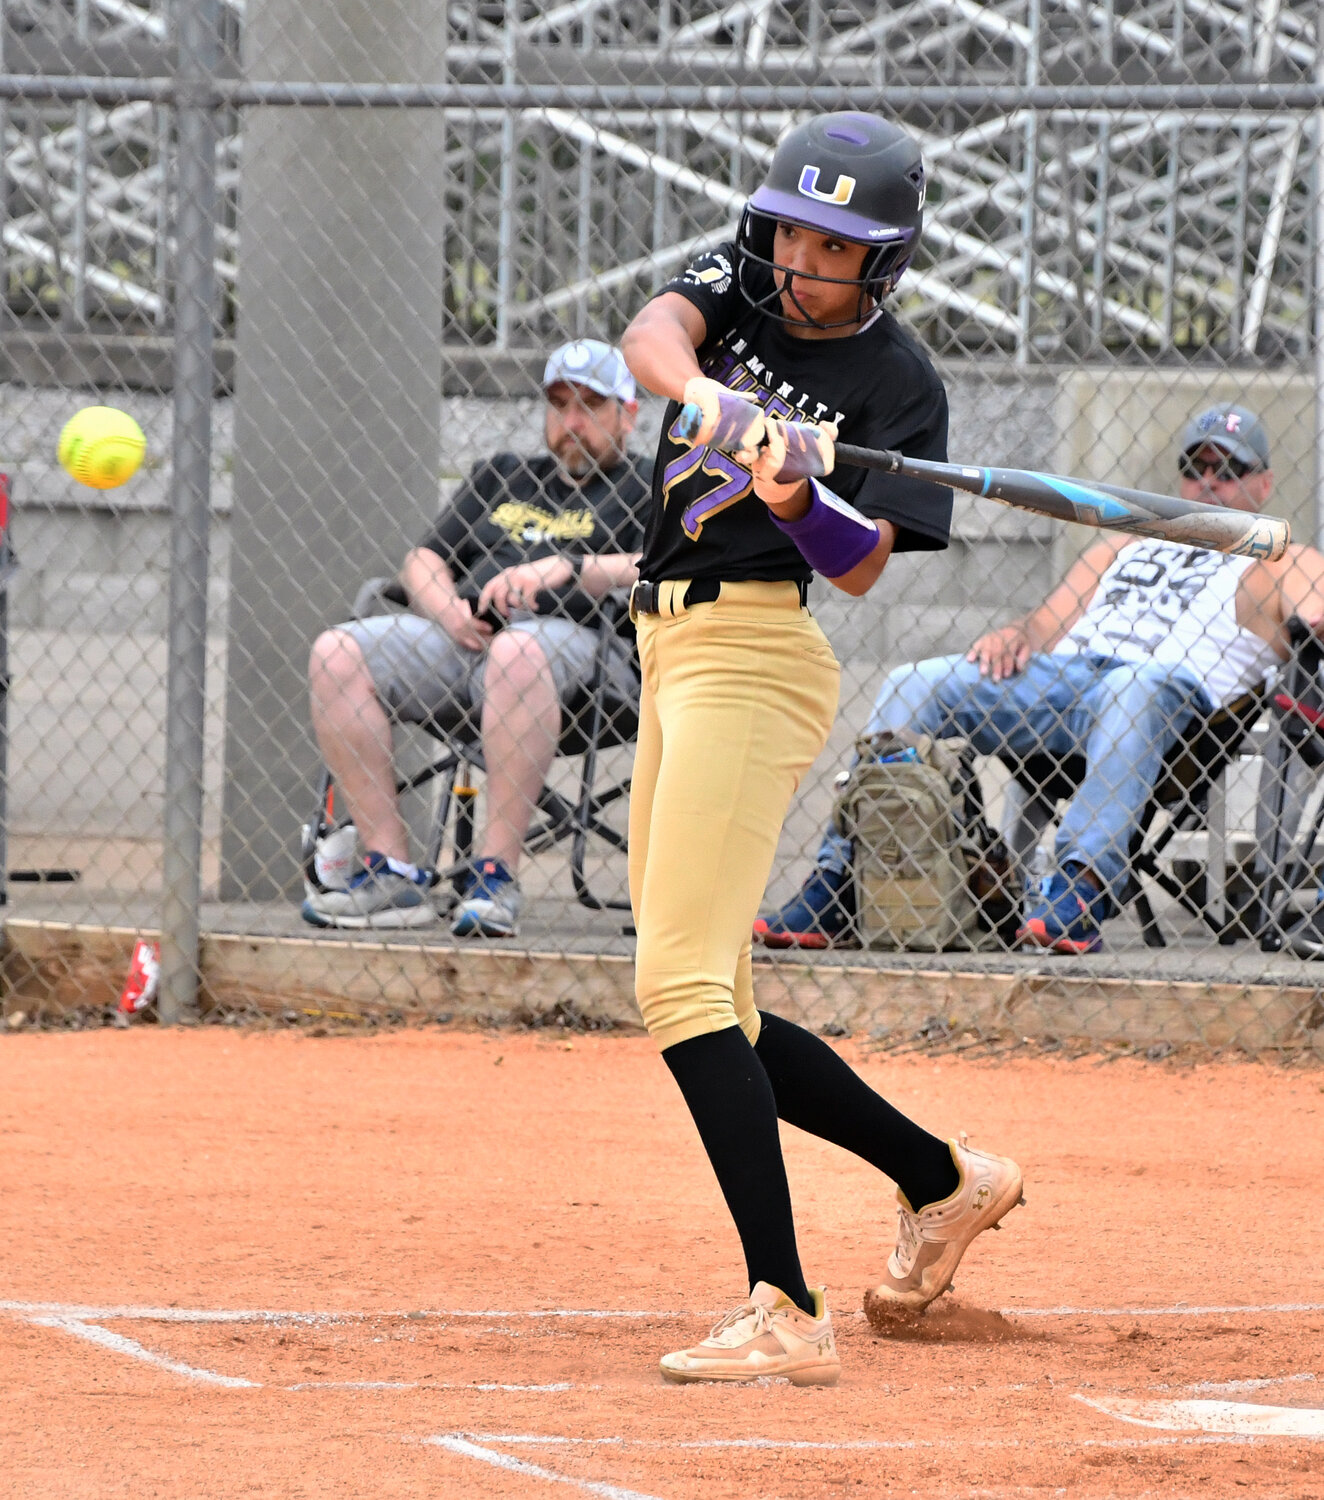 Abby Murrill keeps her eye on the ball and reaches base for the Viqueens.